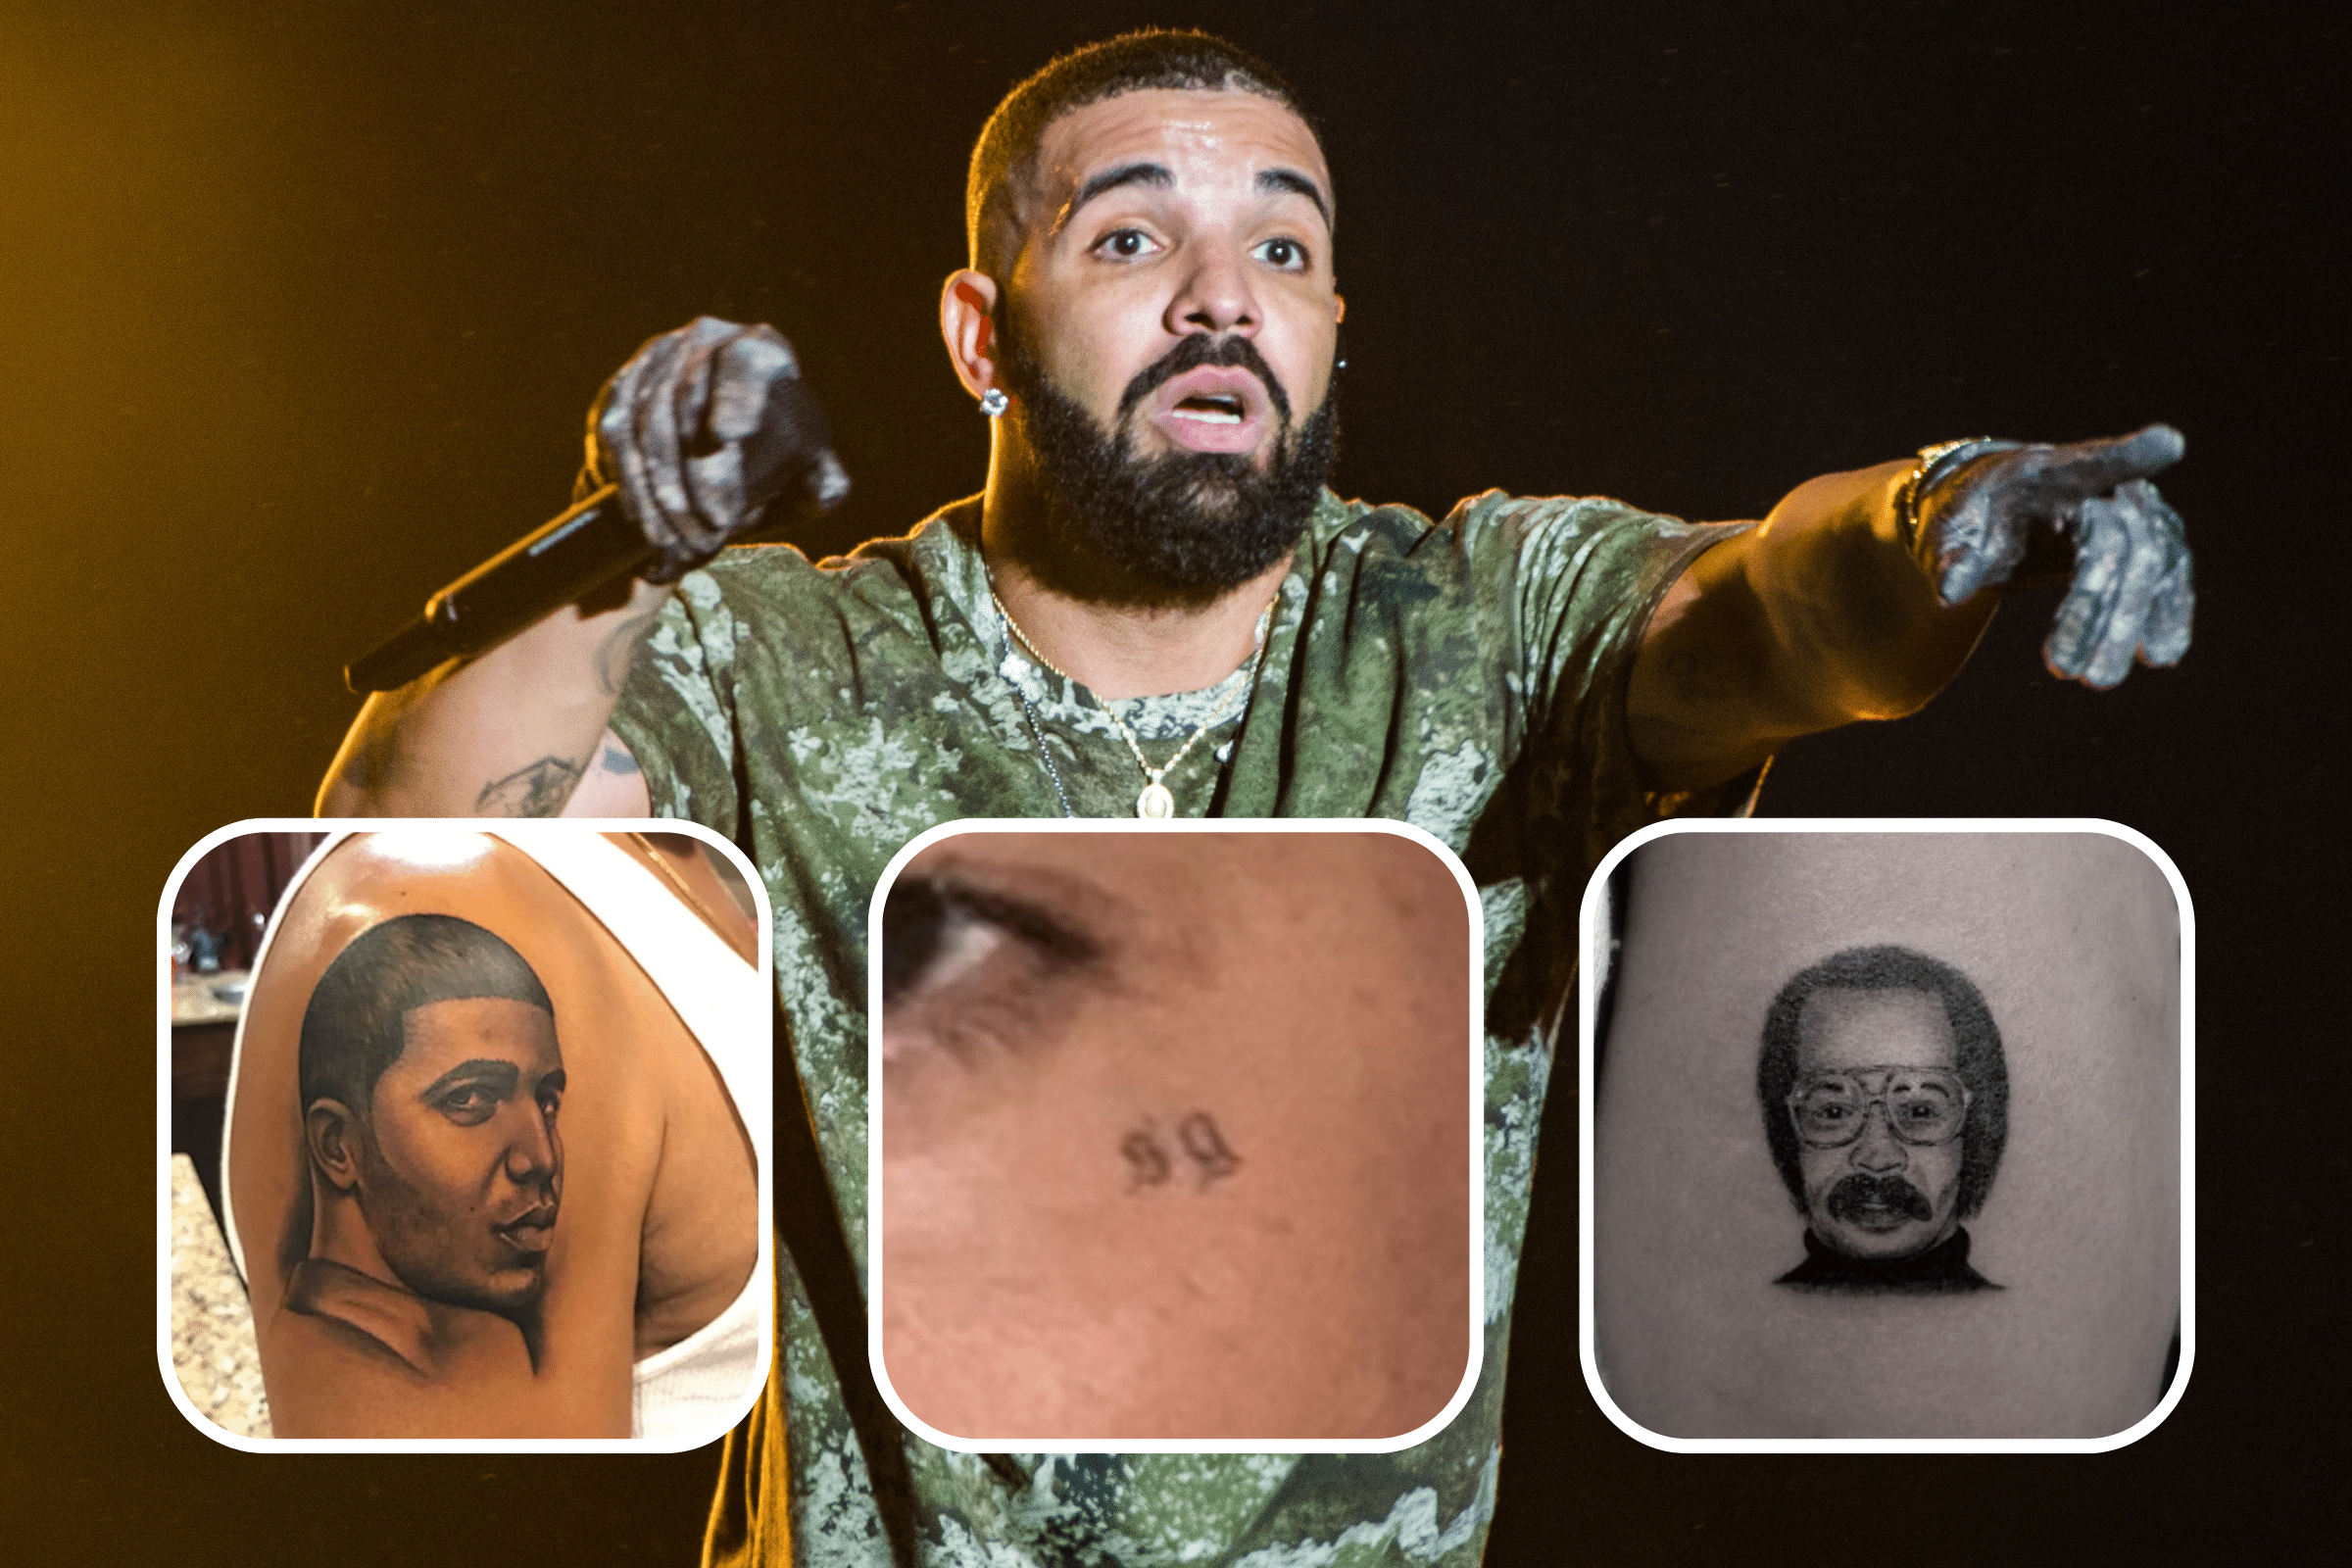 Drake face tattoo meaning